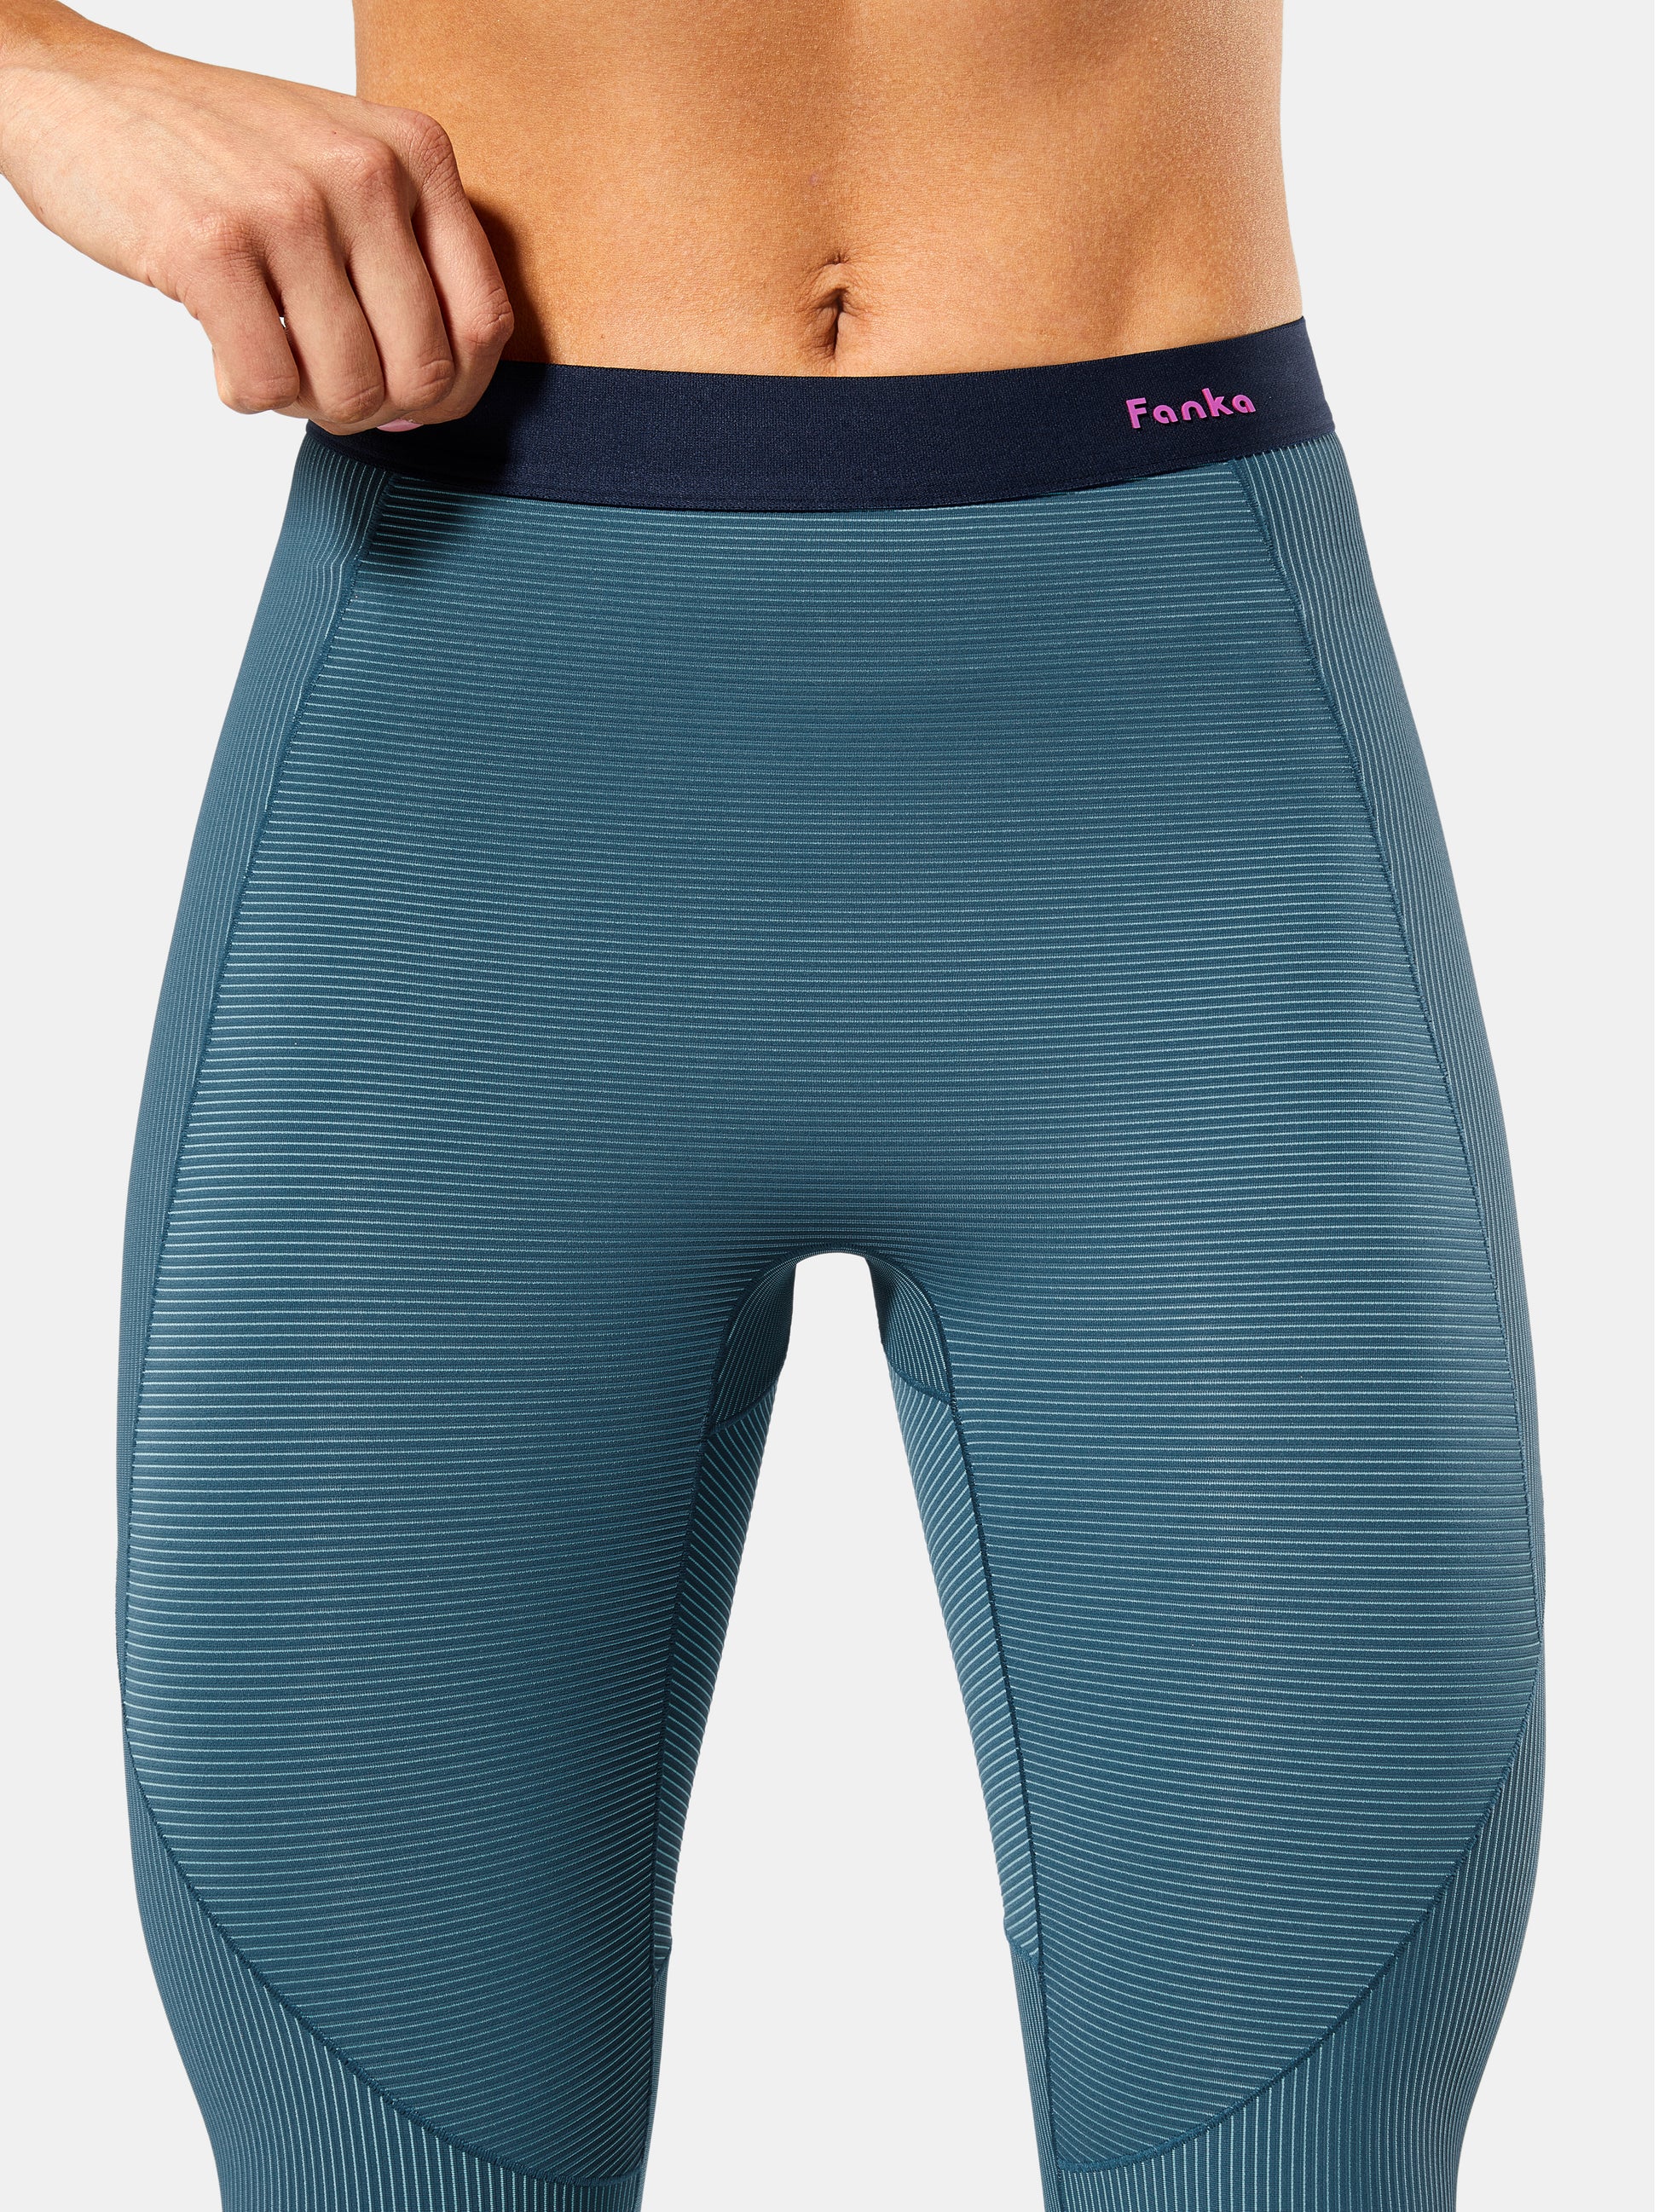 Fanka Lift n Curve Collection  Women's Leggings Ready for